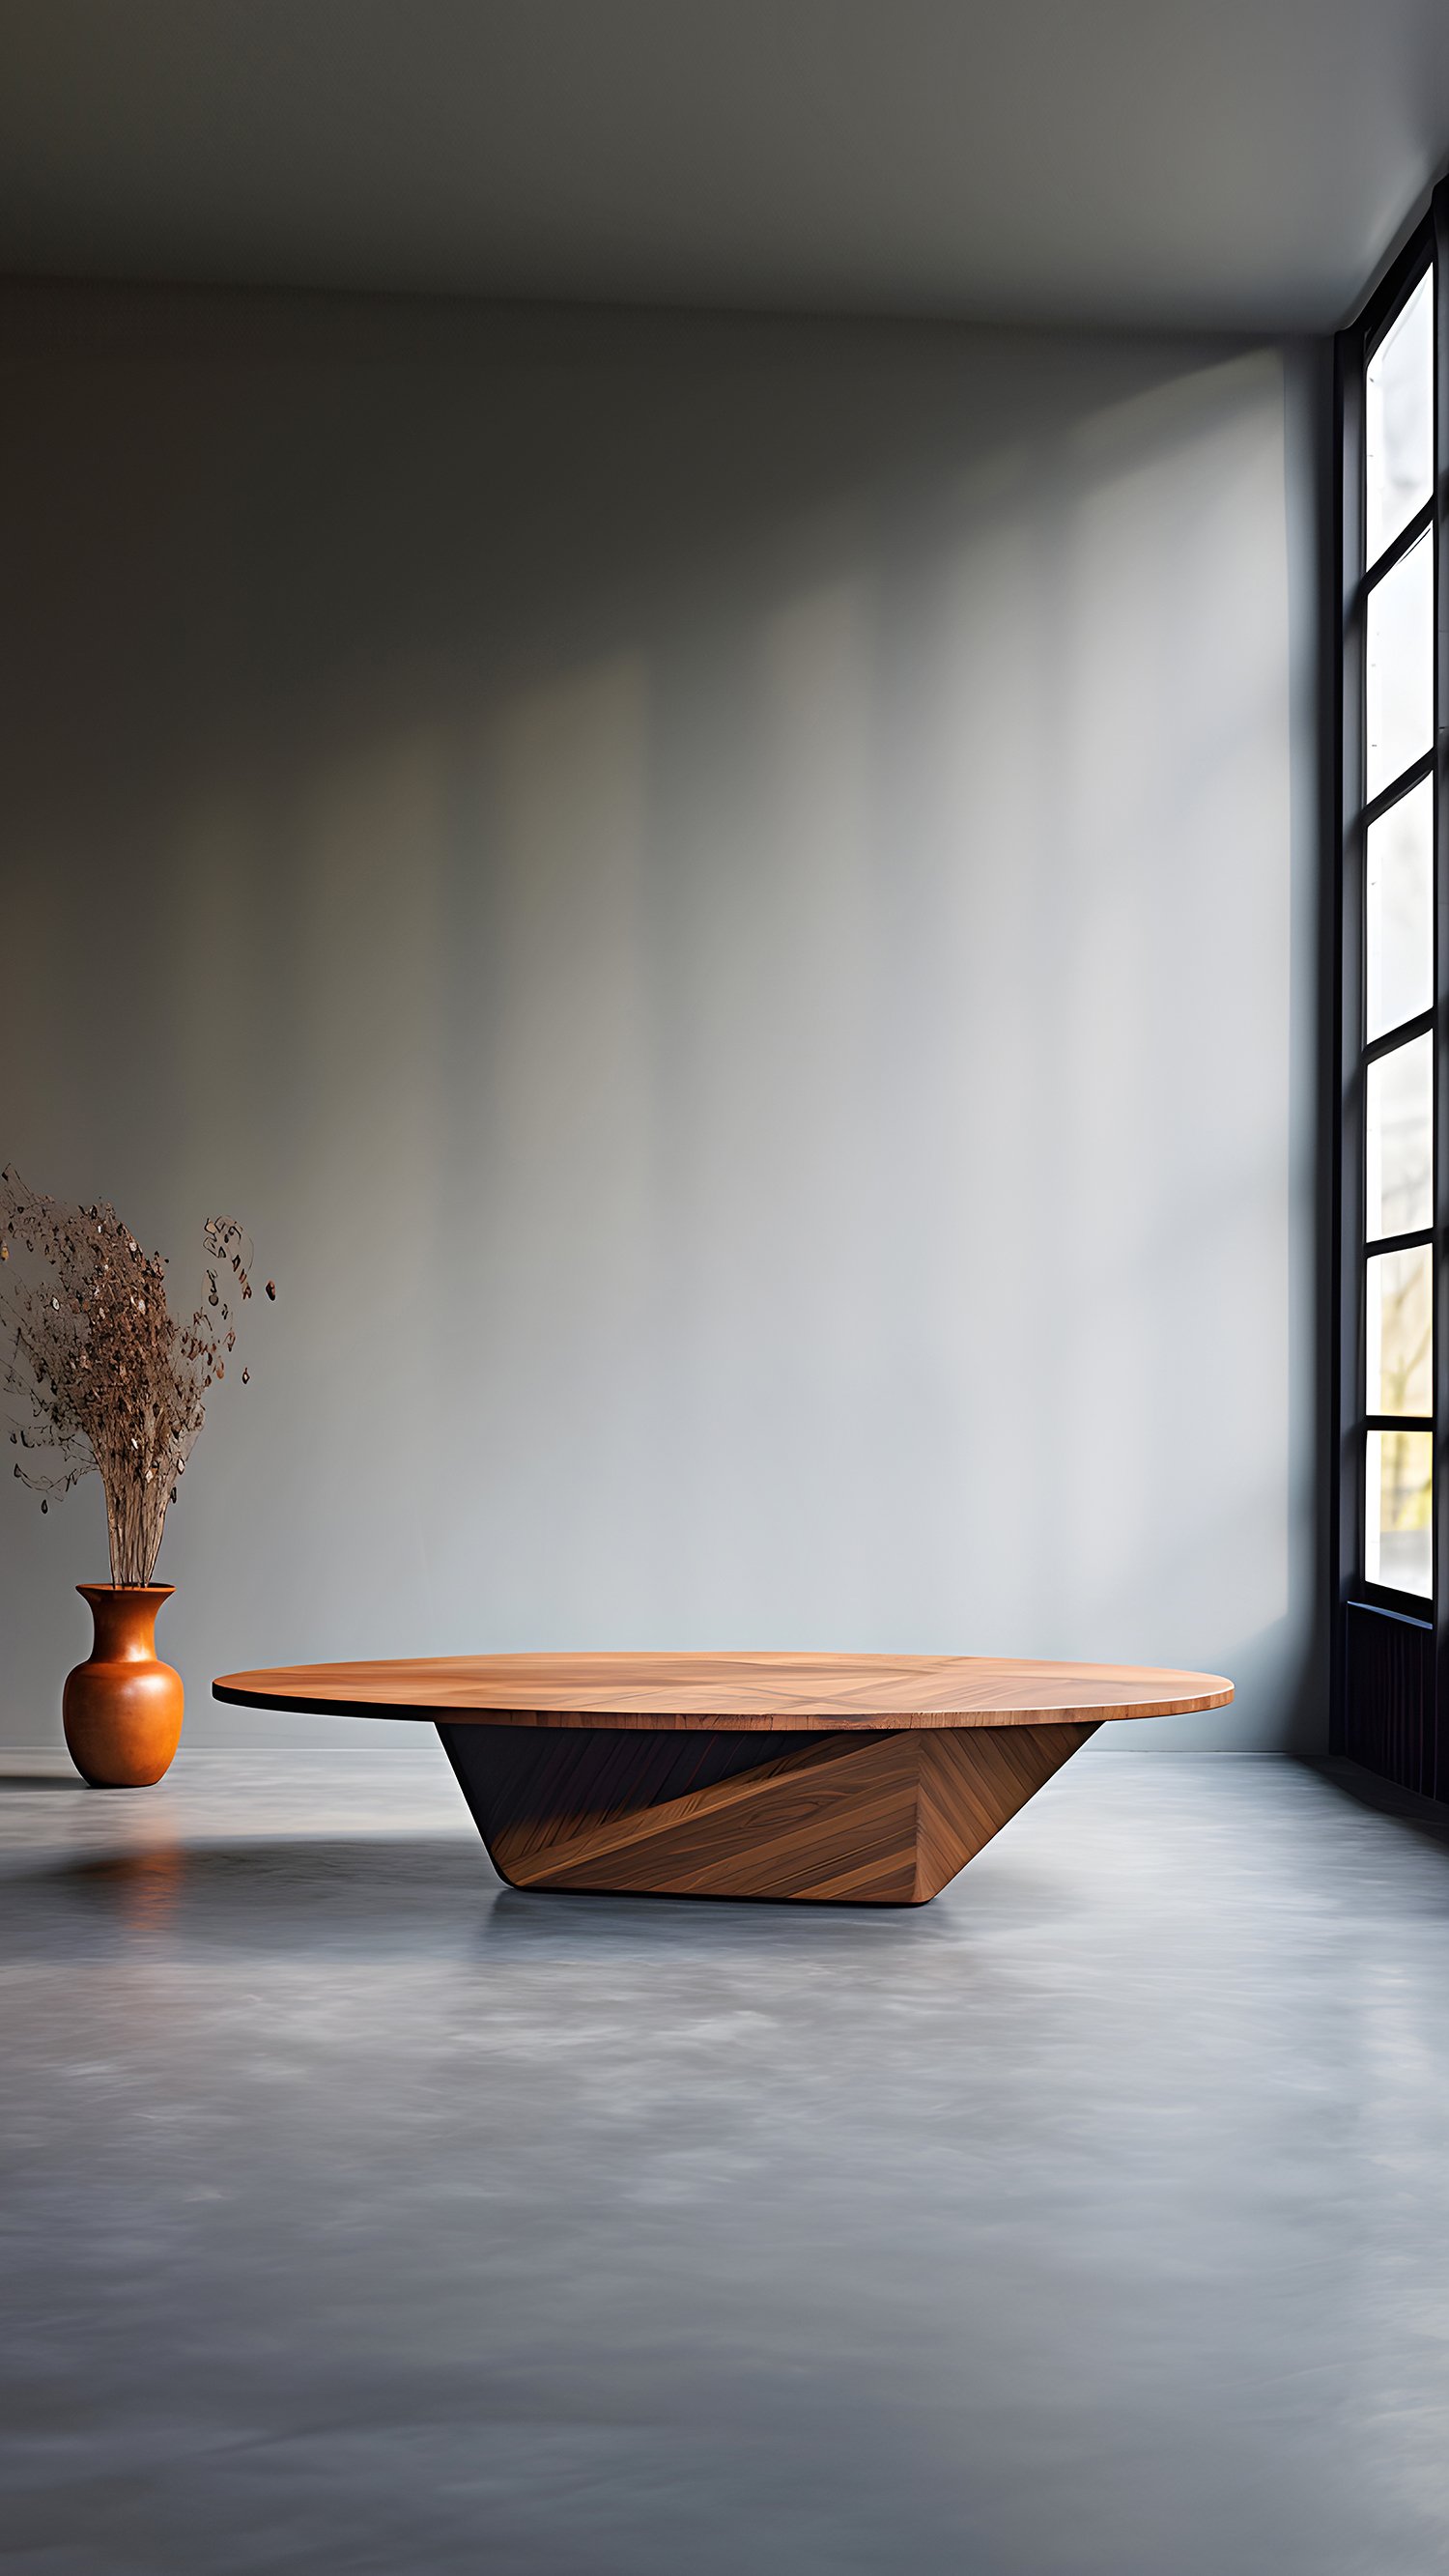 Sculptural Coffee Table Made of Solid Wood, Center Table Solace S13 by Joel Escalona — 6.jpg